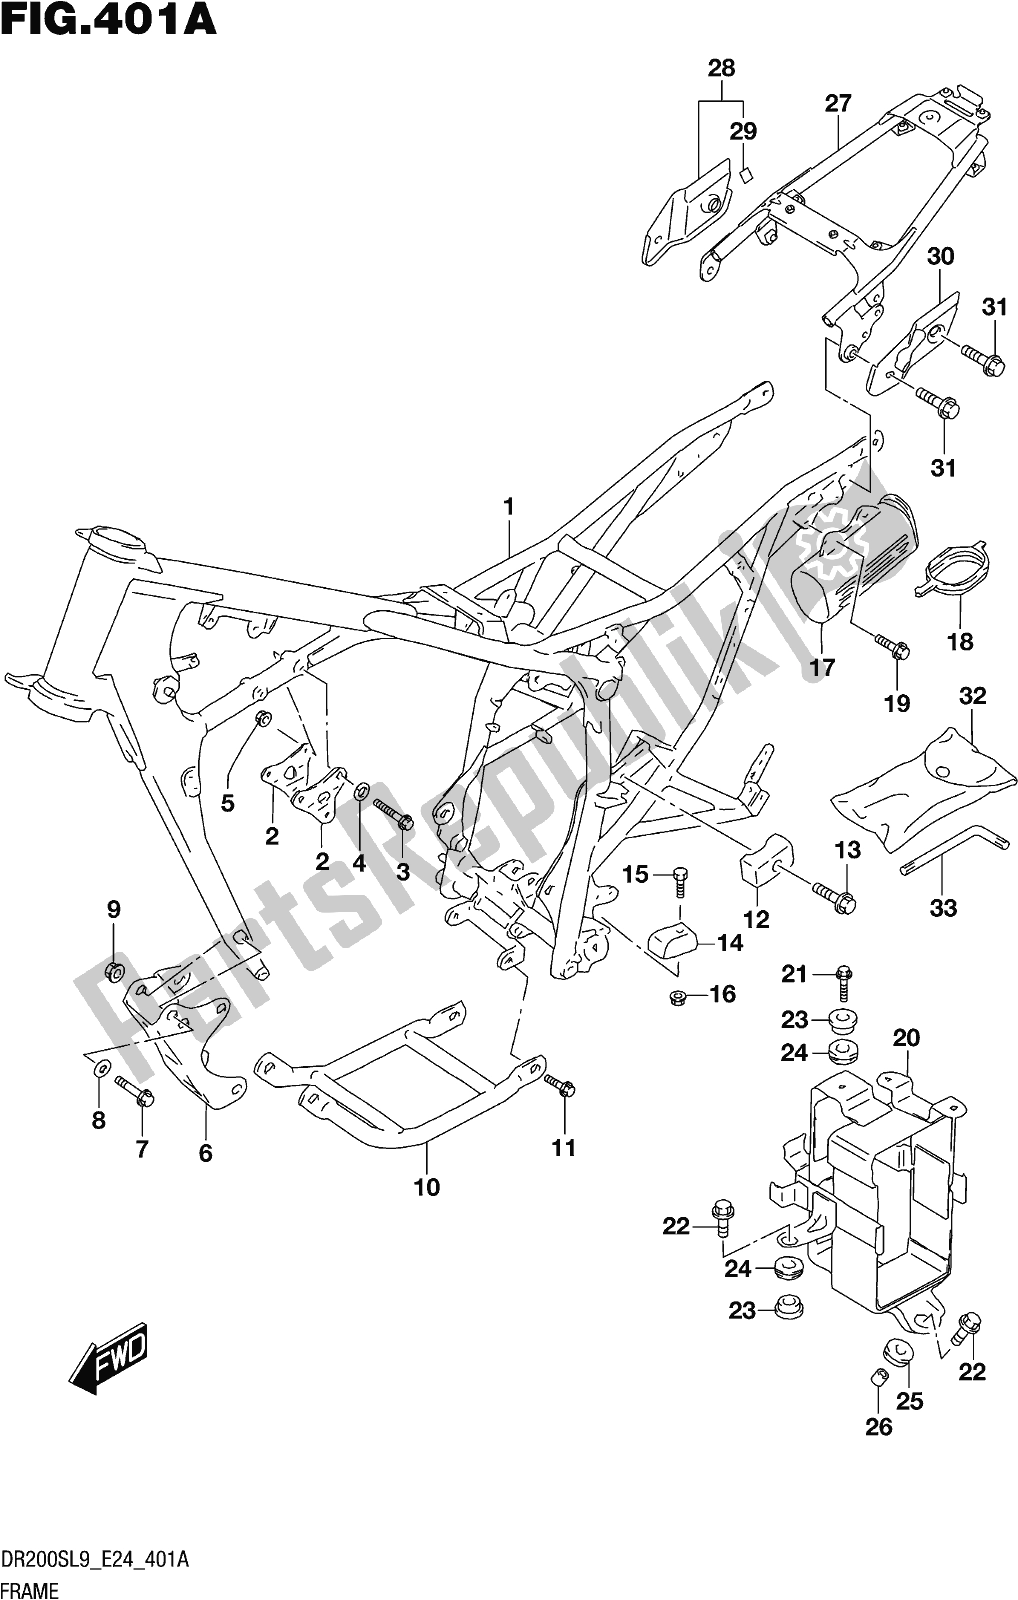 All parts for the Fig. 401a Frame of the Suzuki DR 200S 2019